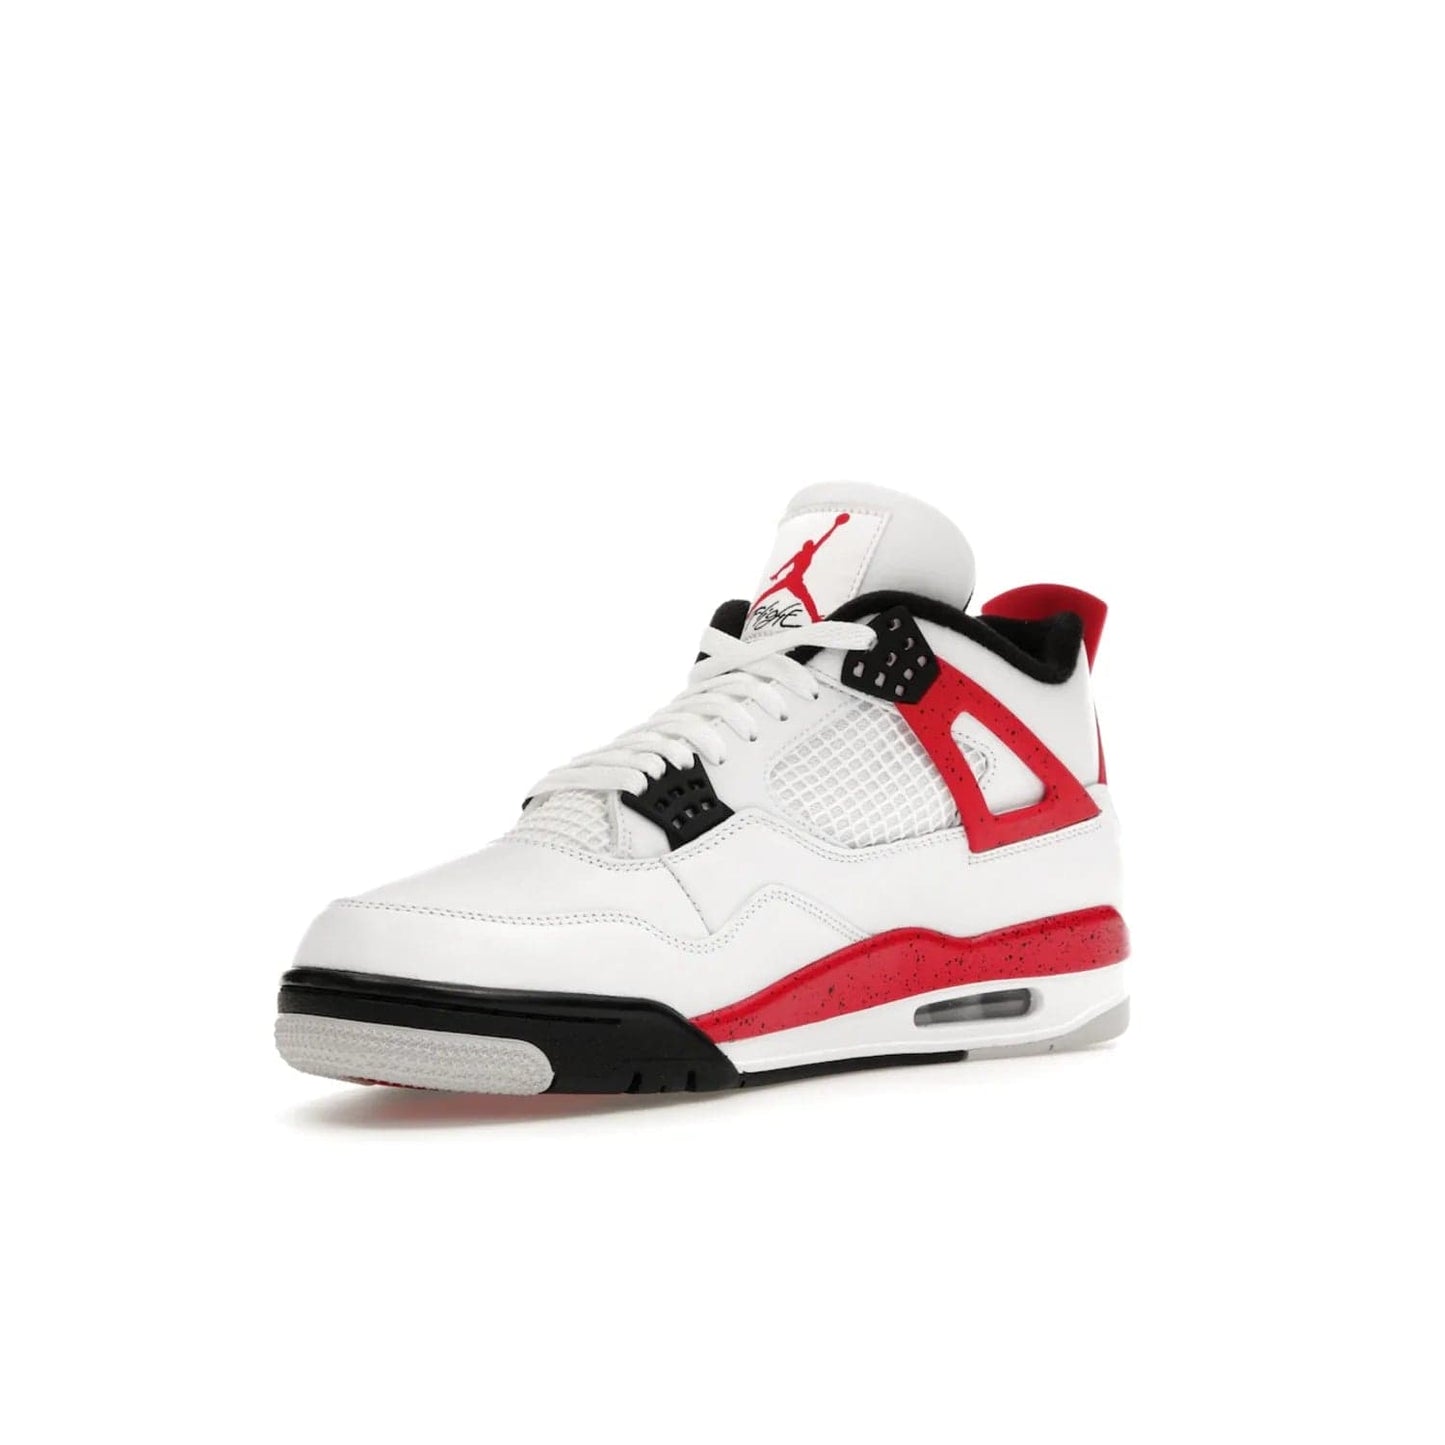 Jordan 4 Retro Red Cement - Image 15 - Only at www.BallersClubKickz.com - Iconic Jordan silhouette with a unique twist. White premium leather uppers with fire red and black detailing. Black, white, and fire red midsole with mesh detailing and Jumpman logo. Jordan 4 Retro Red Cement released with premium price.